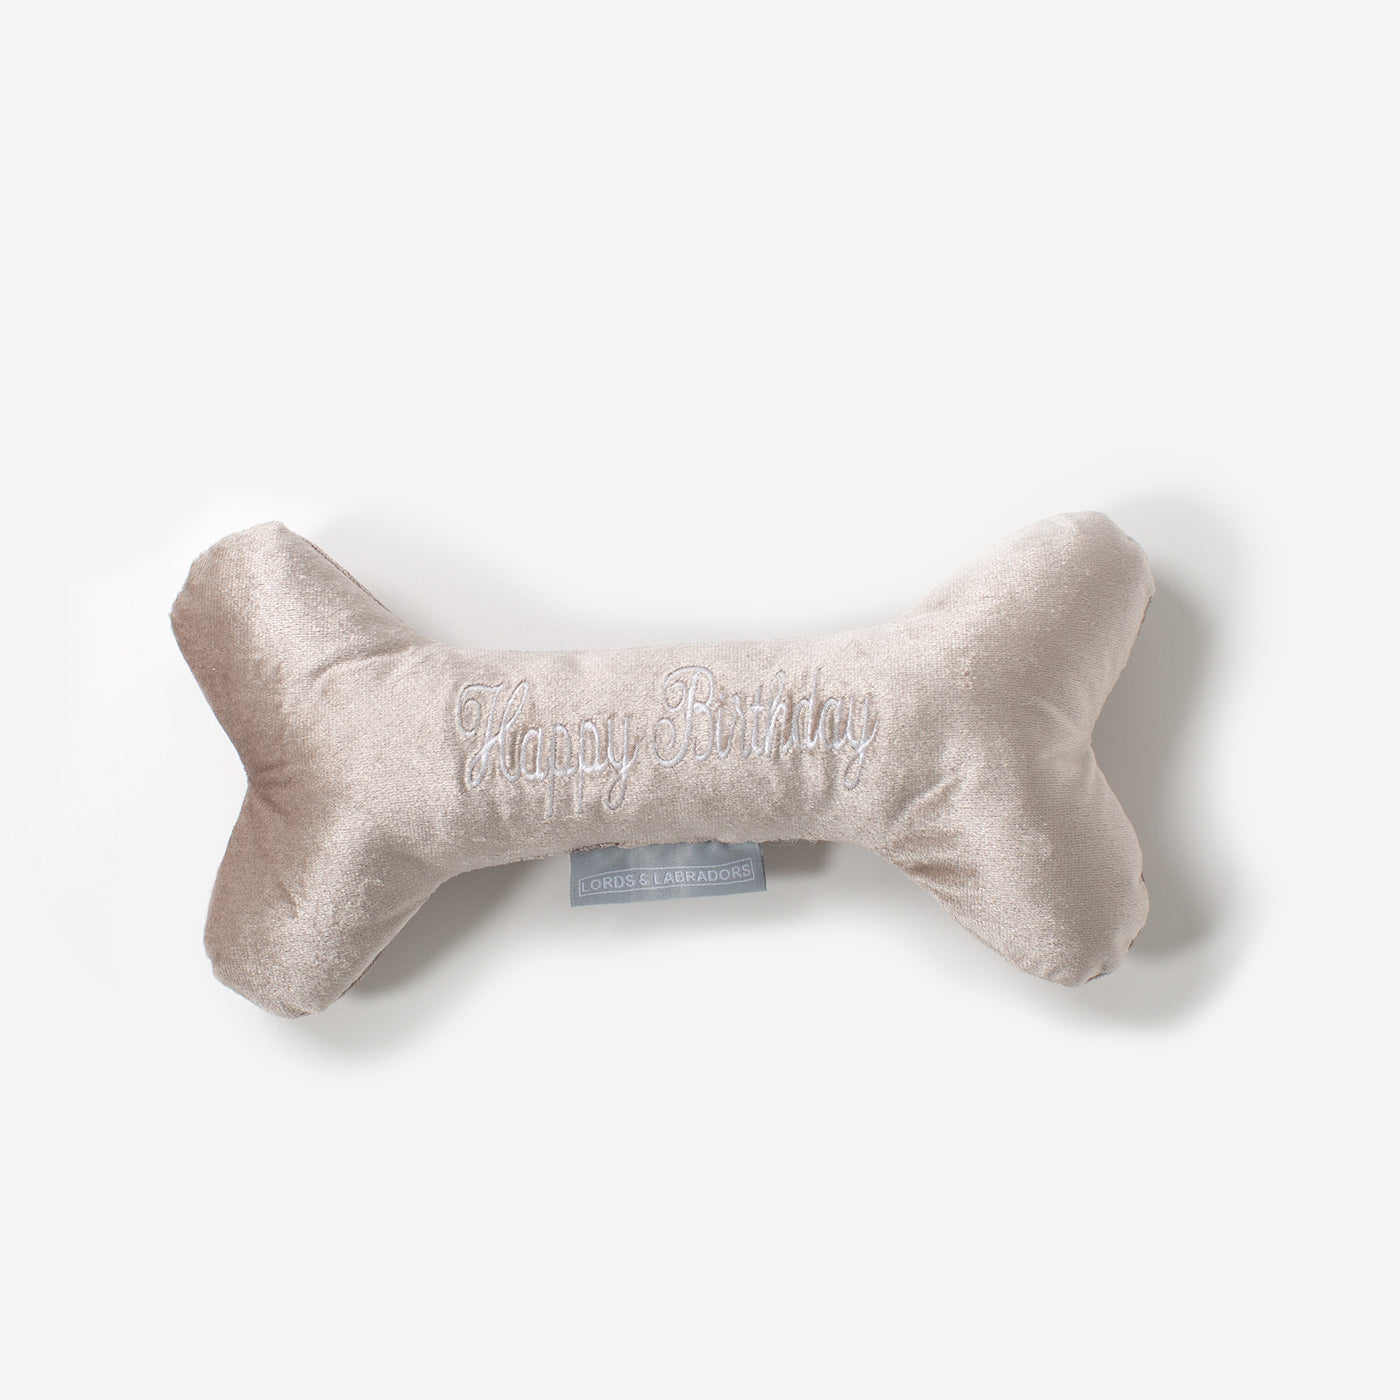 [color:mushroom velvet] Present The Perfect Pet Playtime With Our Luxury 'Happy Birthday' Dog Bone Toy, In Stunning Mushroom Velvet! Available Now at Lords & Labradors US